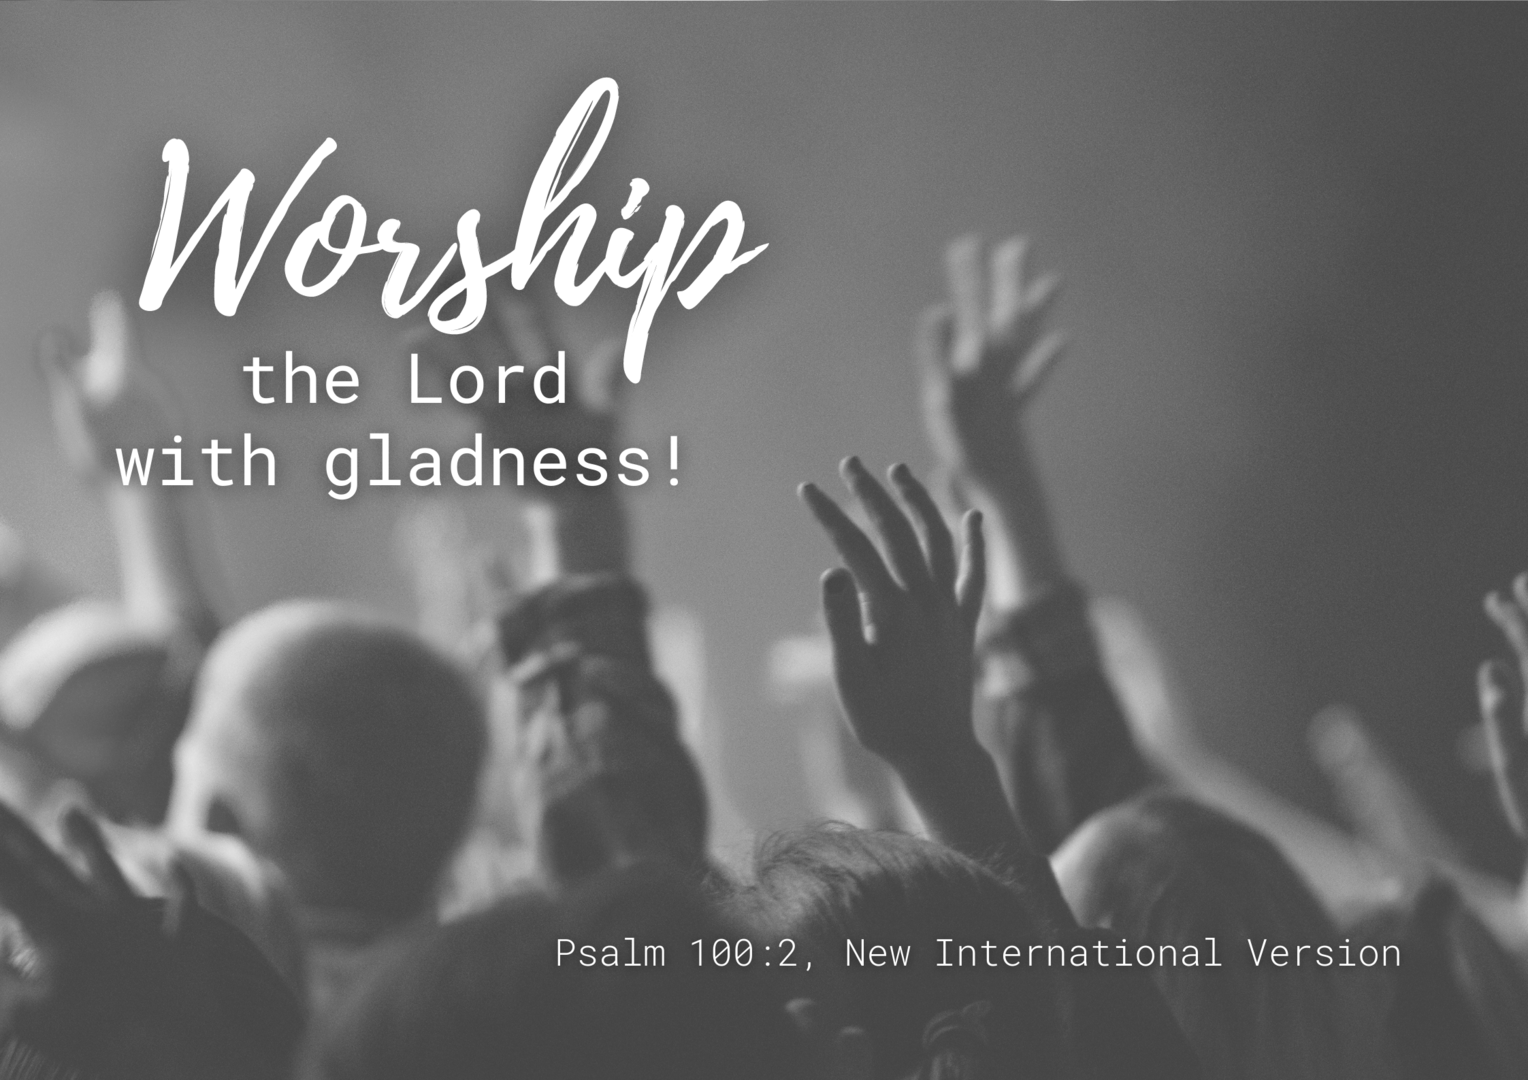 Worship the Lord with gladness